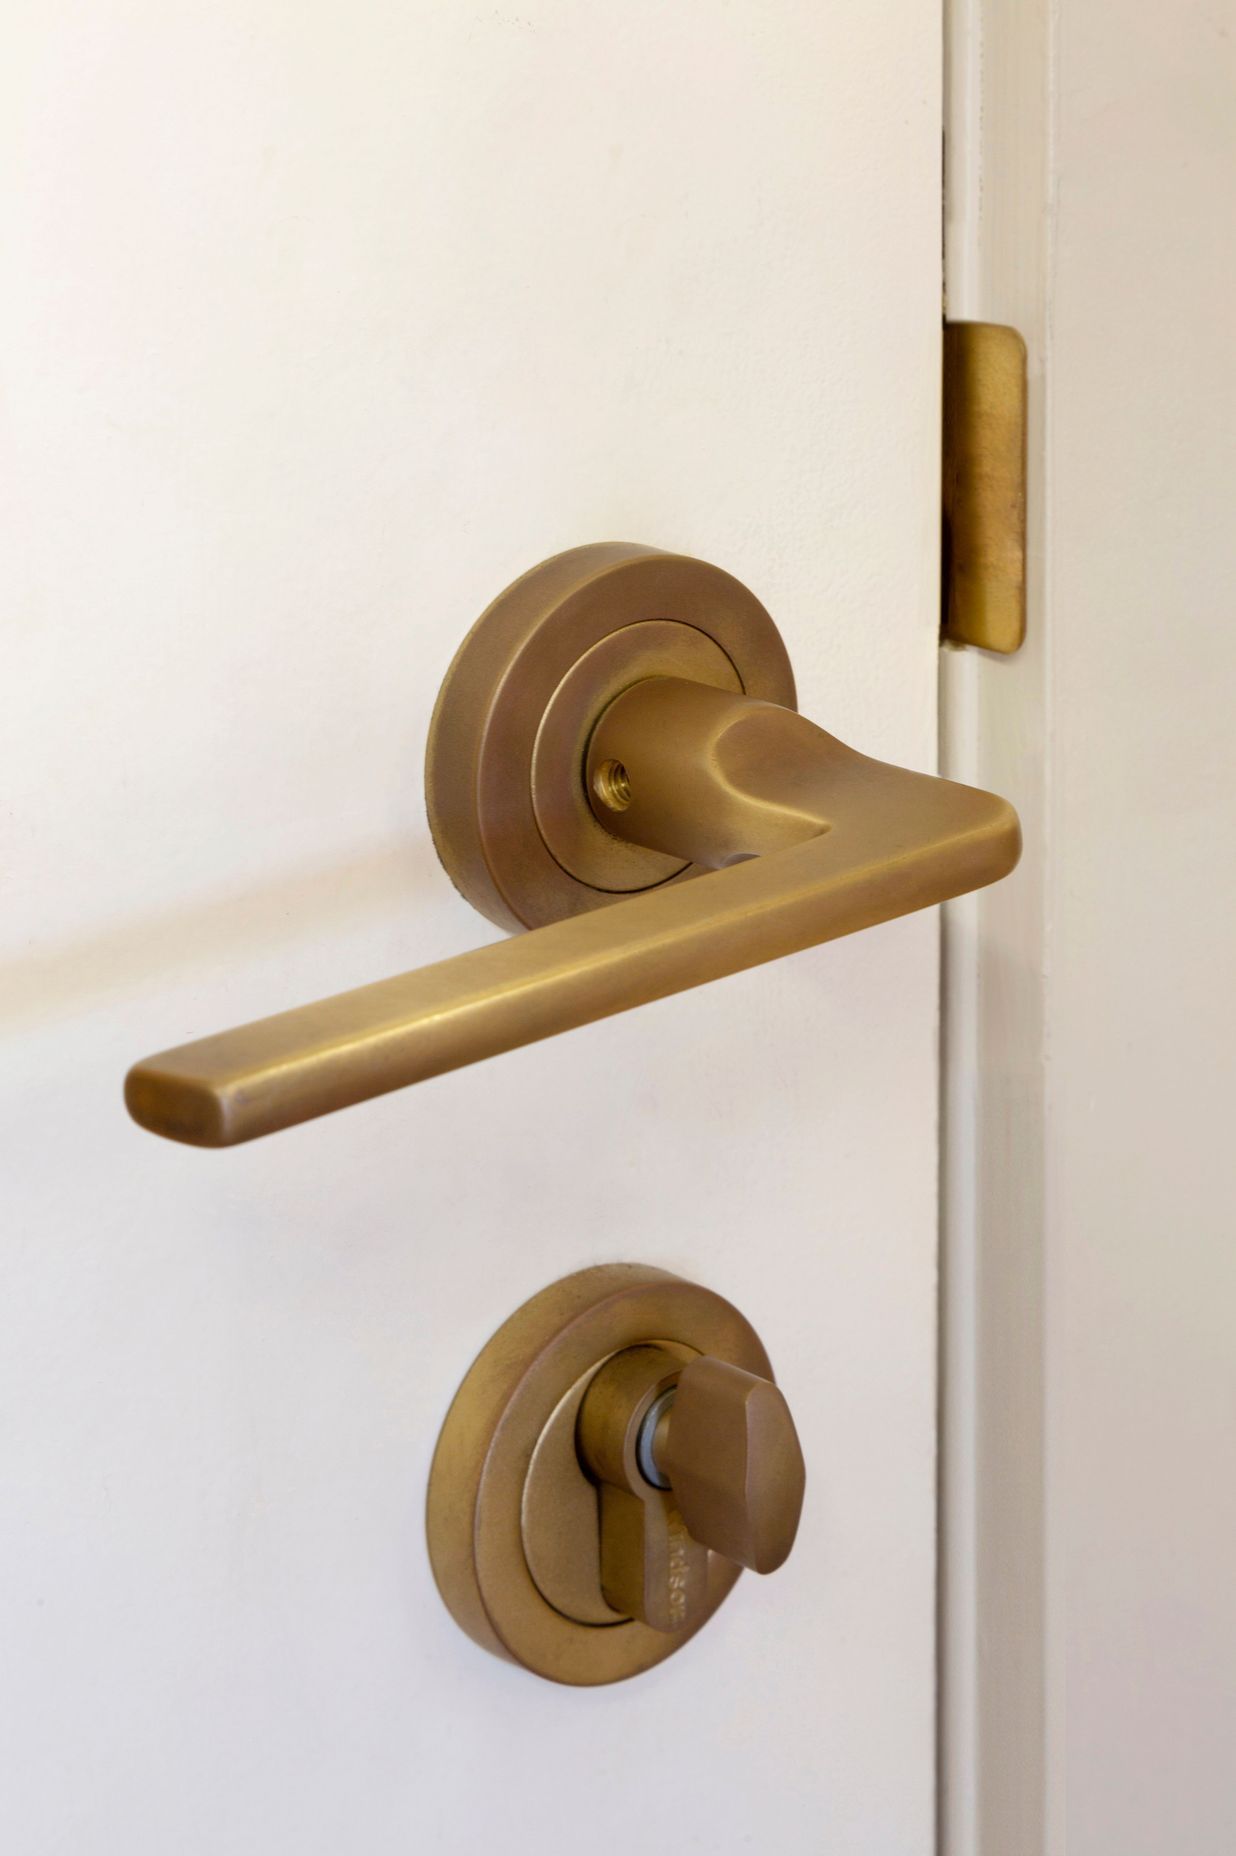 Chalet Lever on Rose – Locking Set Finish: Roman Brass Levers, Code: 8211-RB Lock, Code: 1143-RB Escutcheons, Code: 8189-RB Cylinder and Turn, Code: 1148-RB